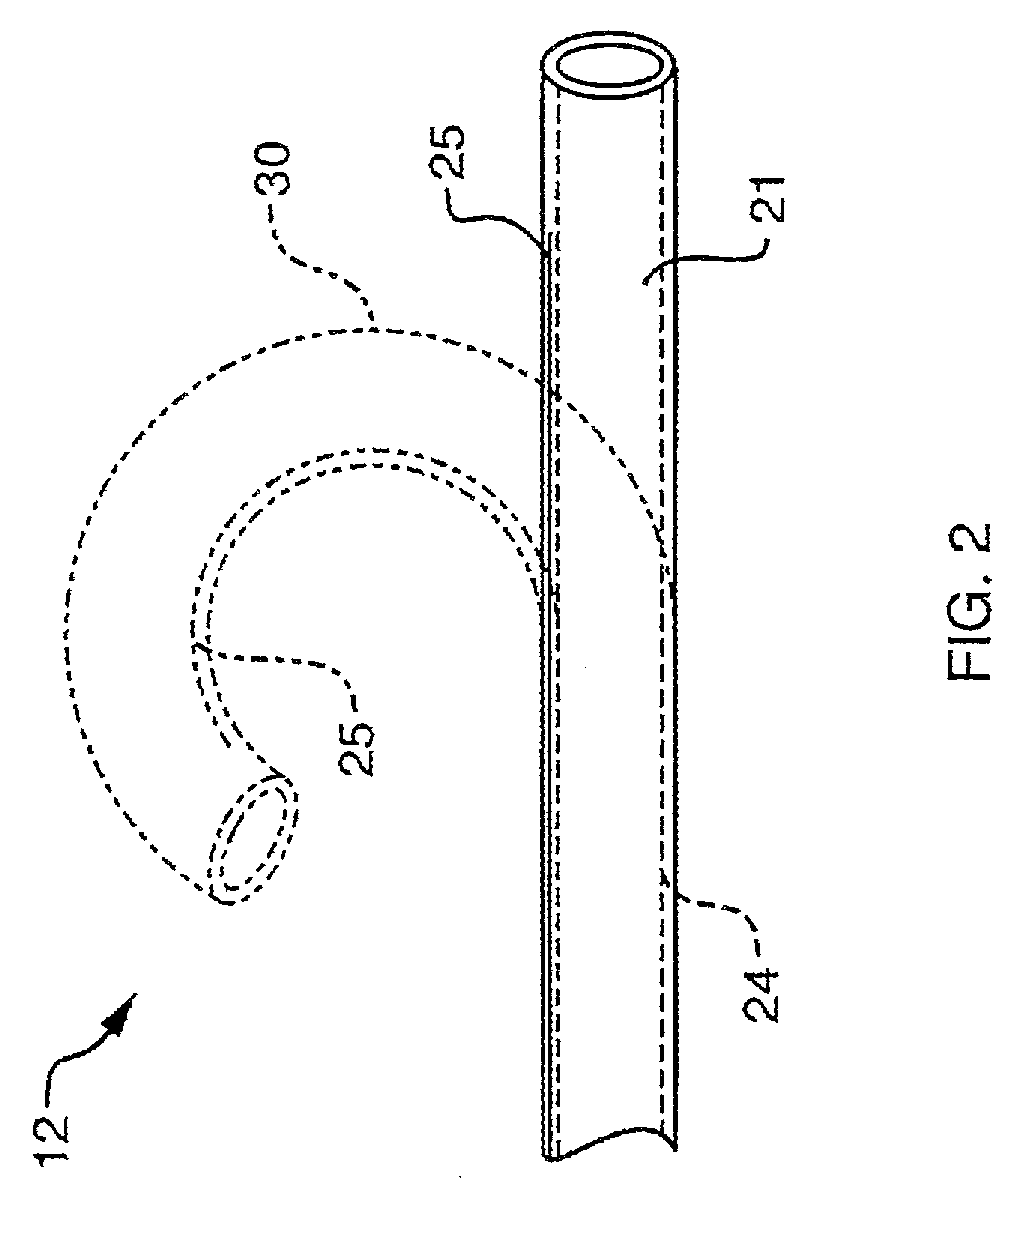 Ablation instrument having deflectable sheath catheters with out-of plane bent tip